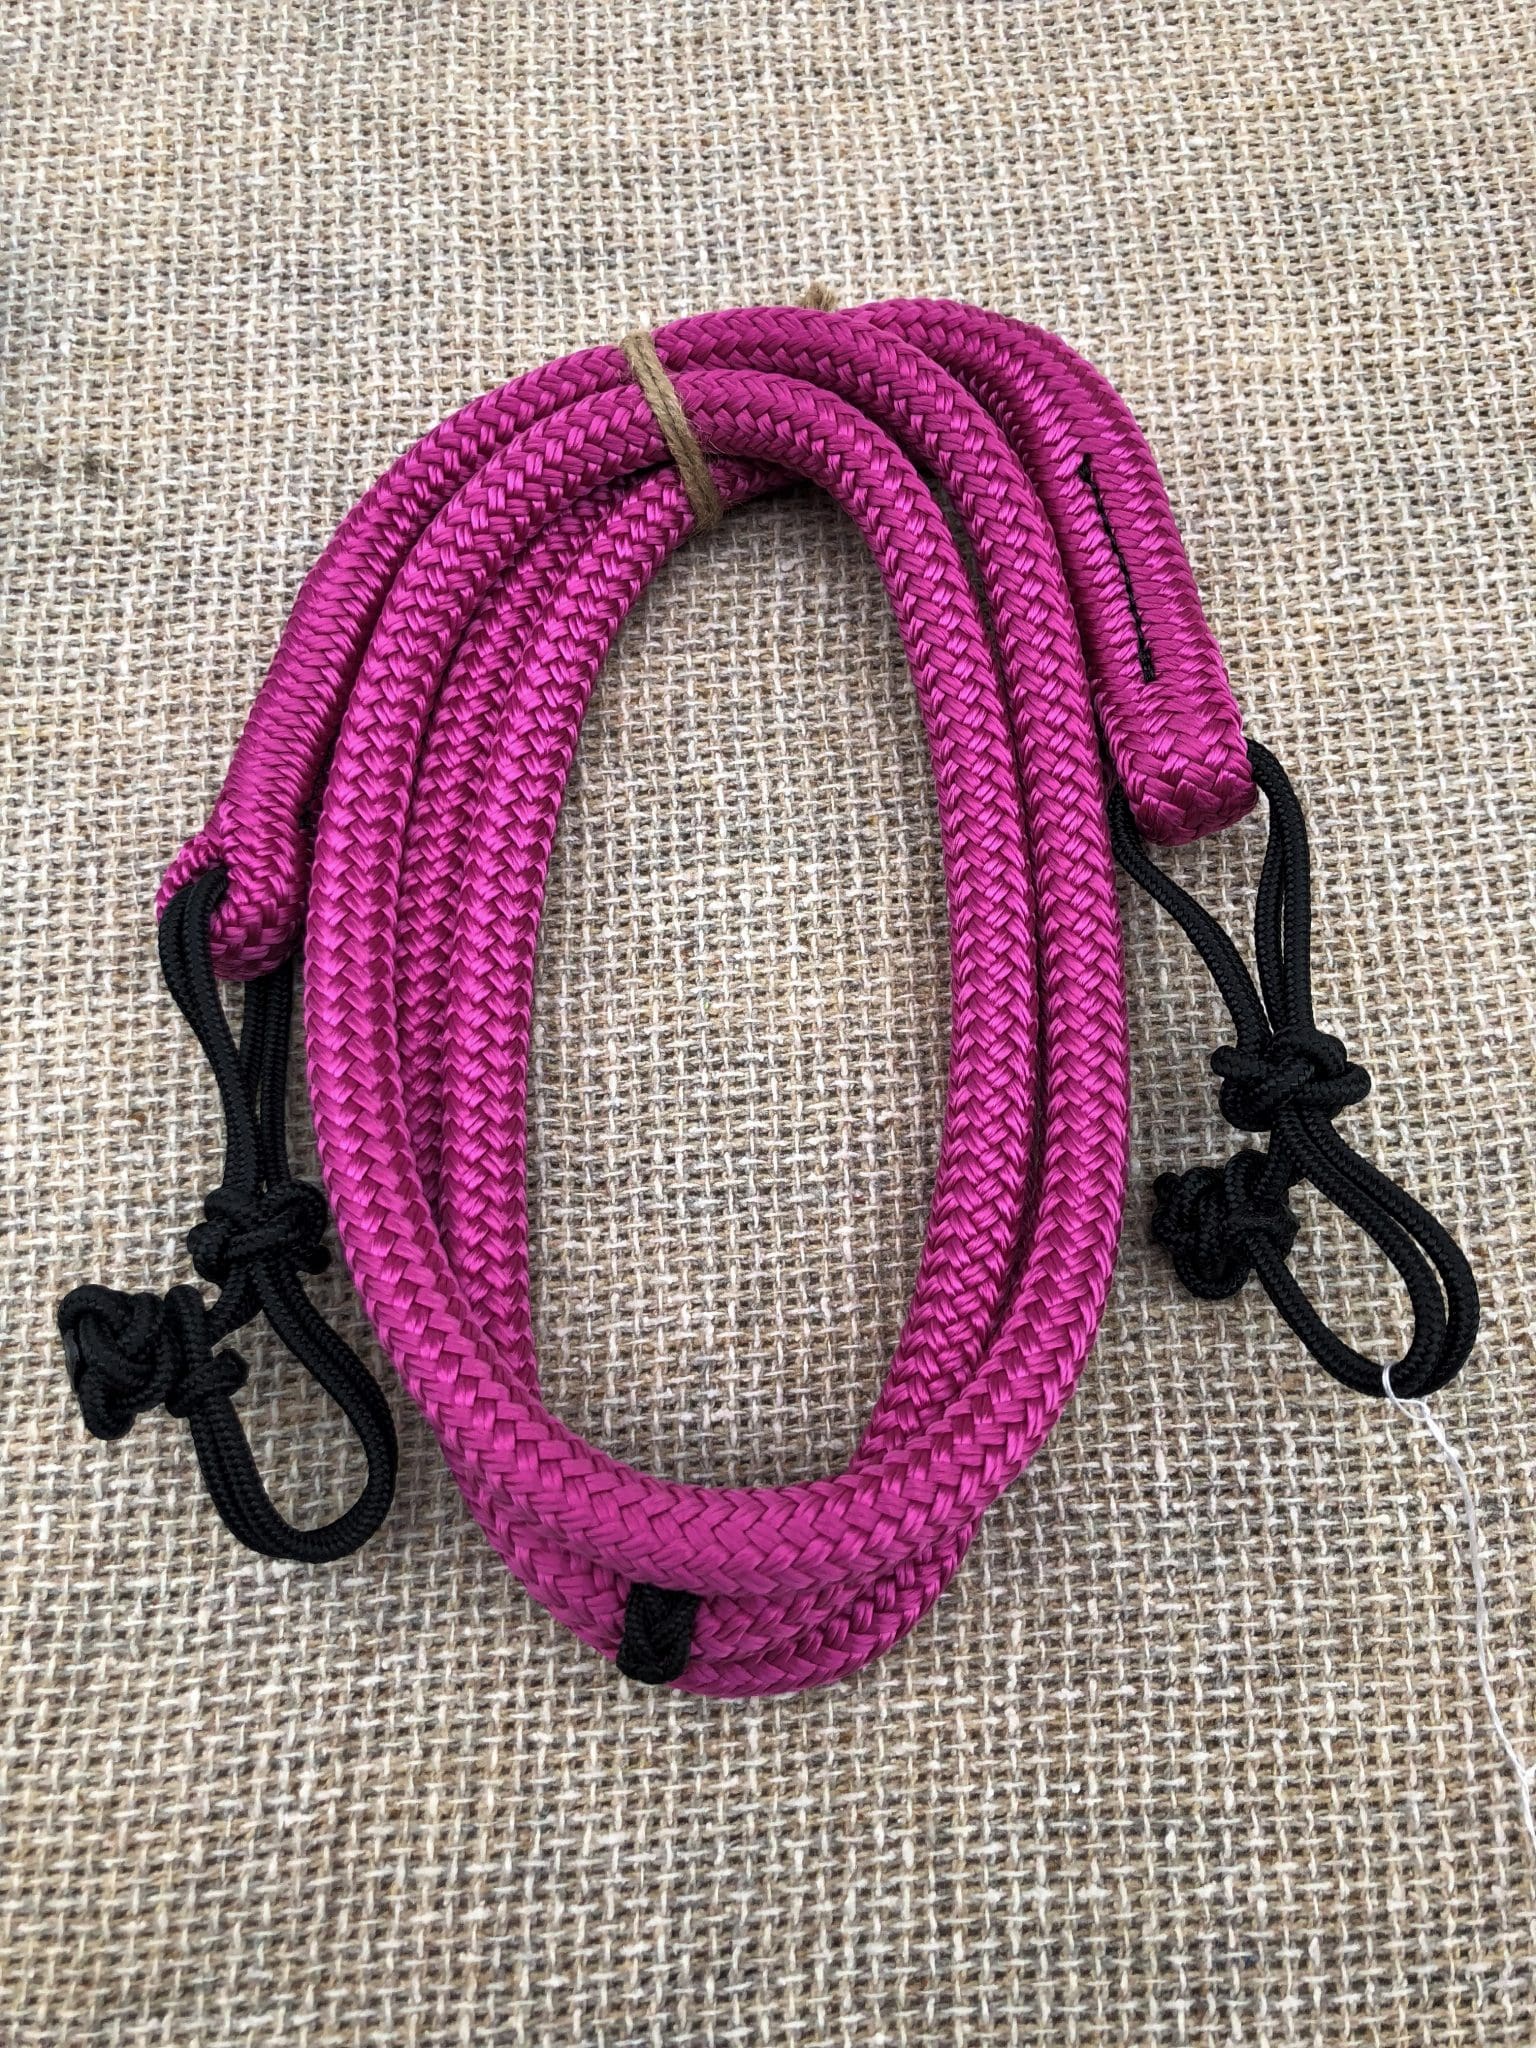 Details about   9' or 10' Reins Loop Rope Roping Rein Barrel Race Pony Single Contest orange tan 